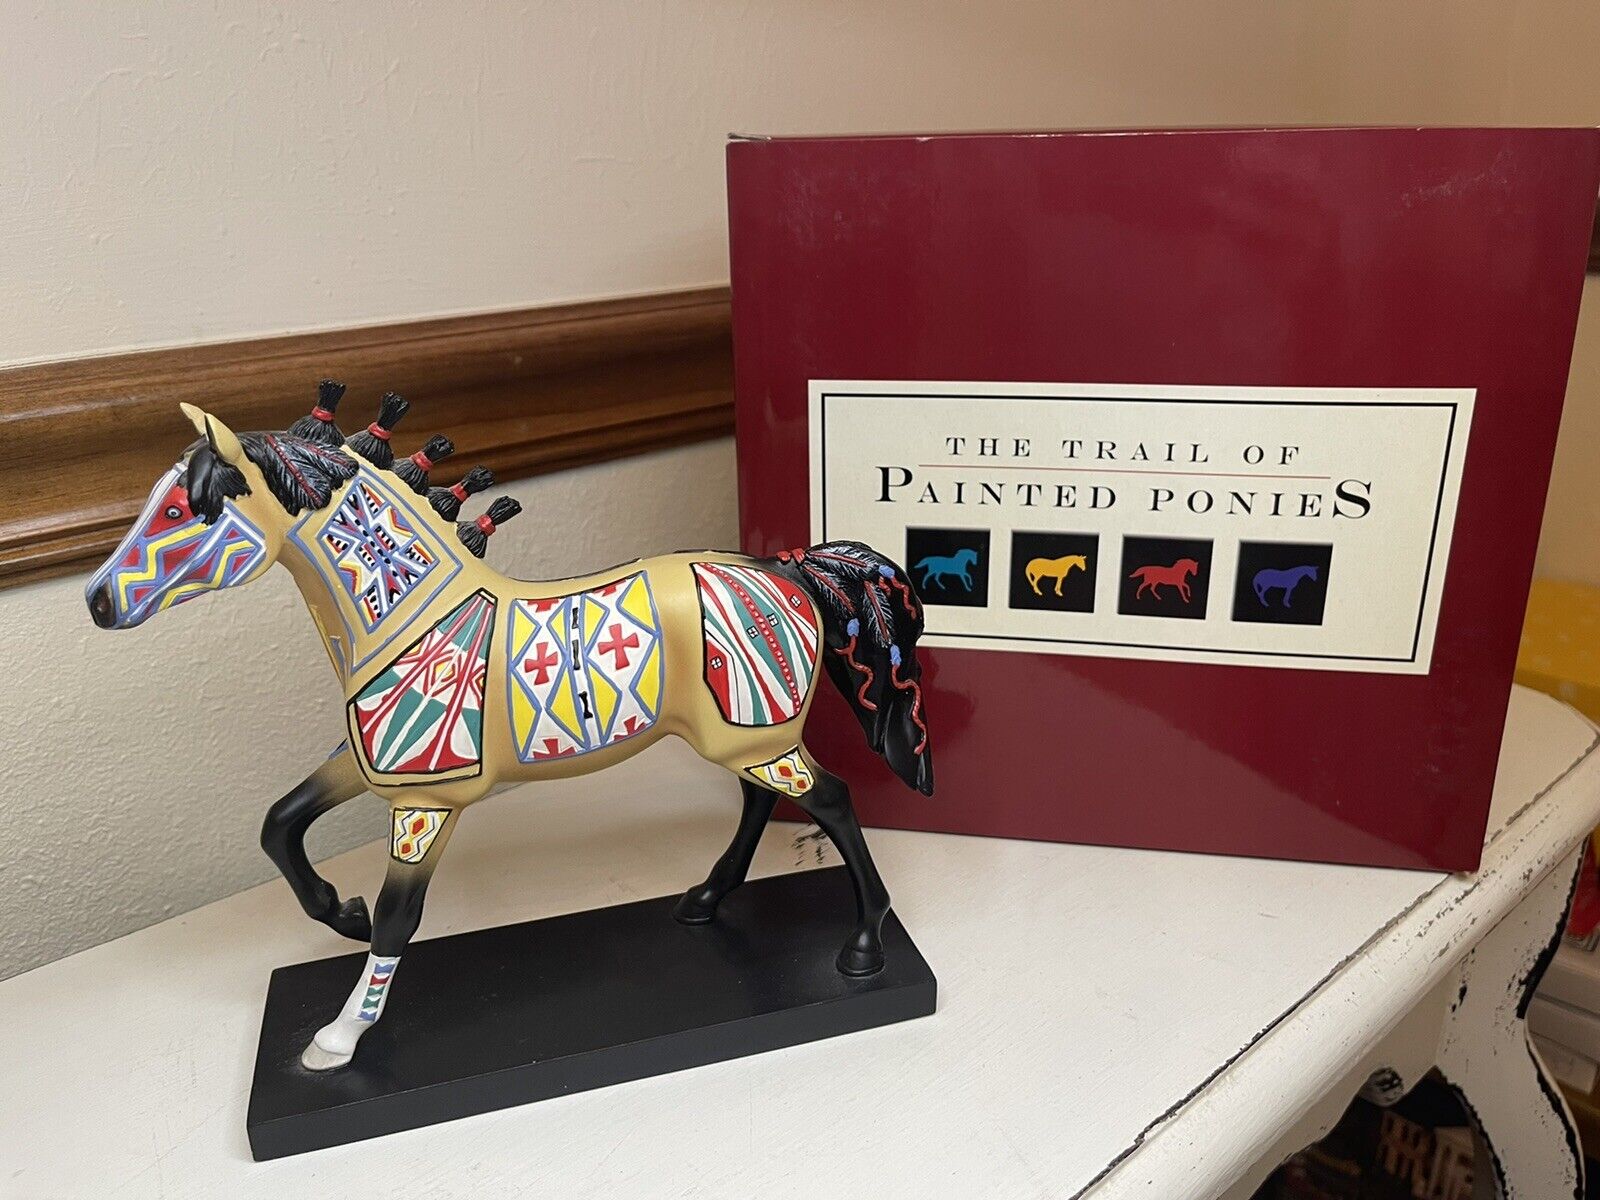 Trail of Painted Ponies 2007- “CHEYENNE PAINTED RAWHIDE” #12242—2E/1,660